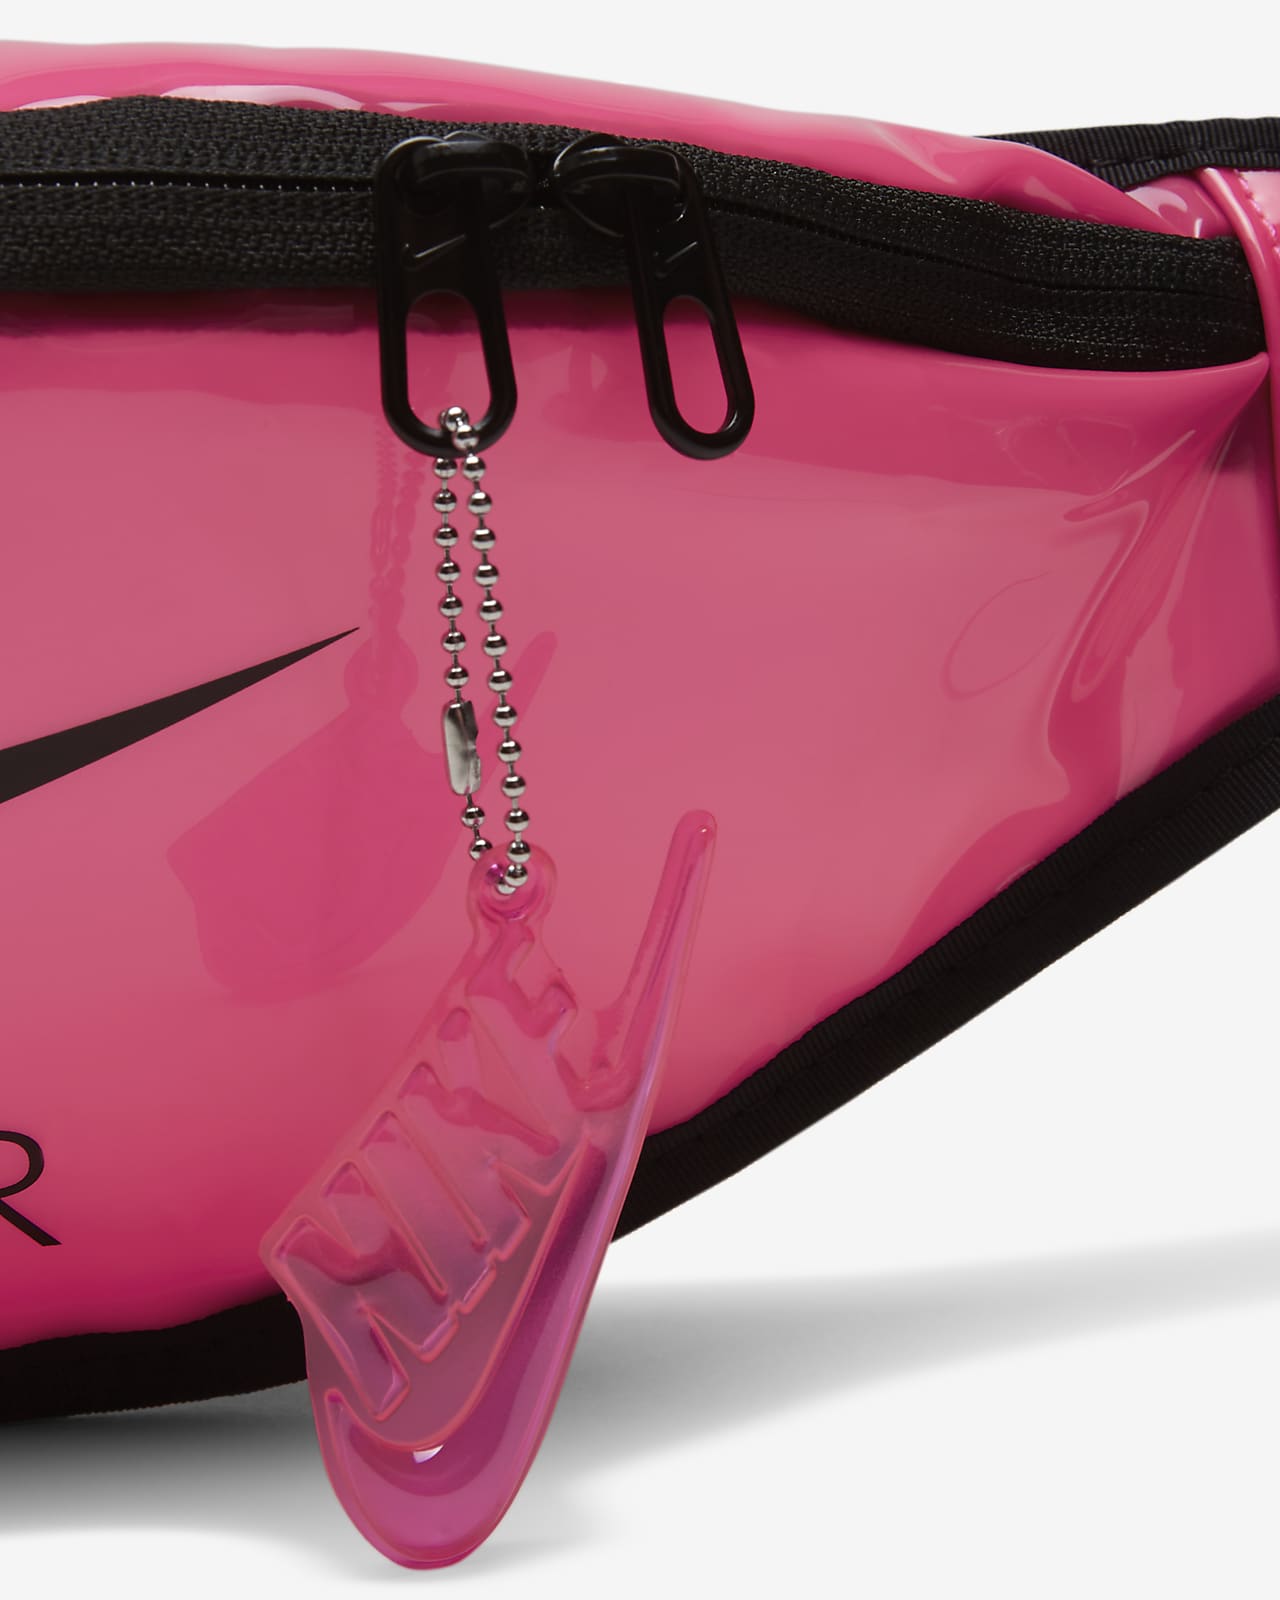 clear nike fanny pack